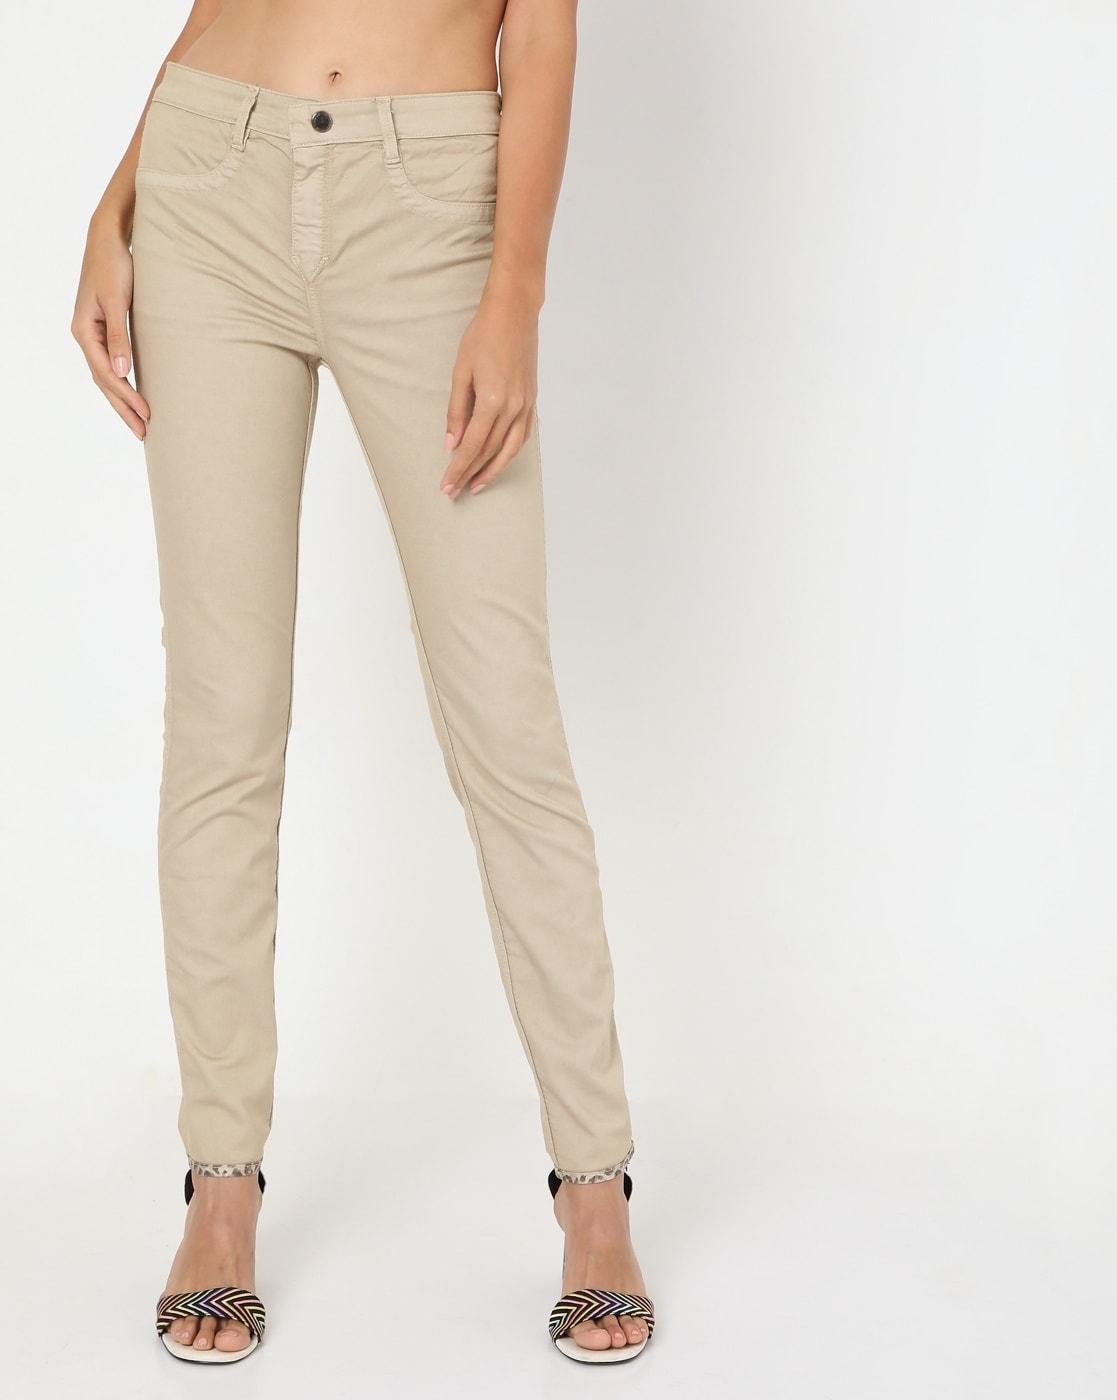 Buy Levis Womens Chino Casual Trousers 745070002Grey32 at Amazonin